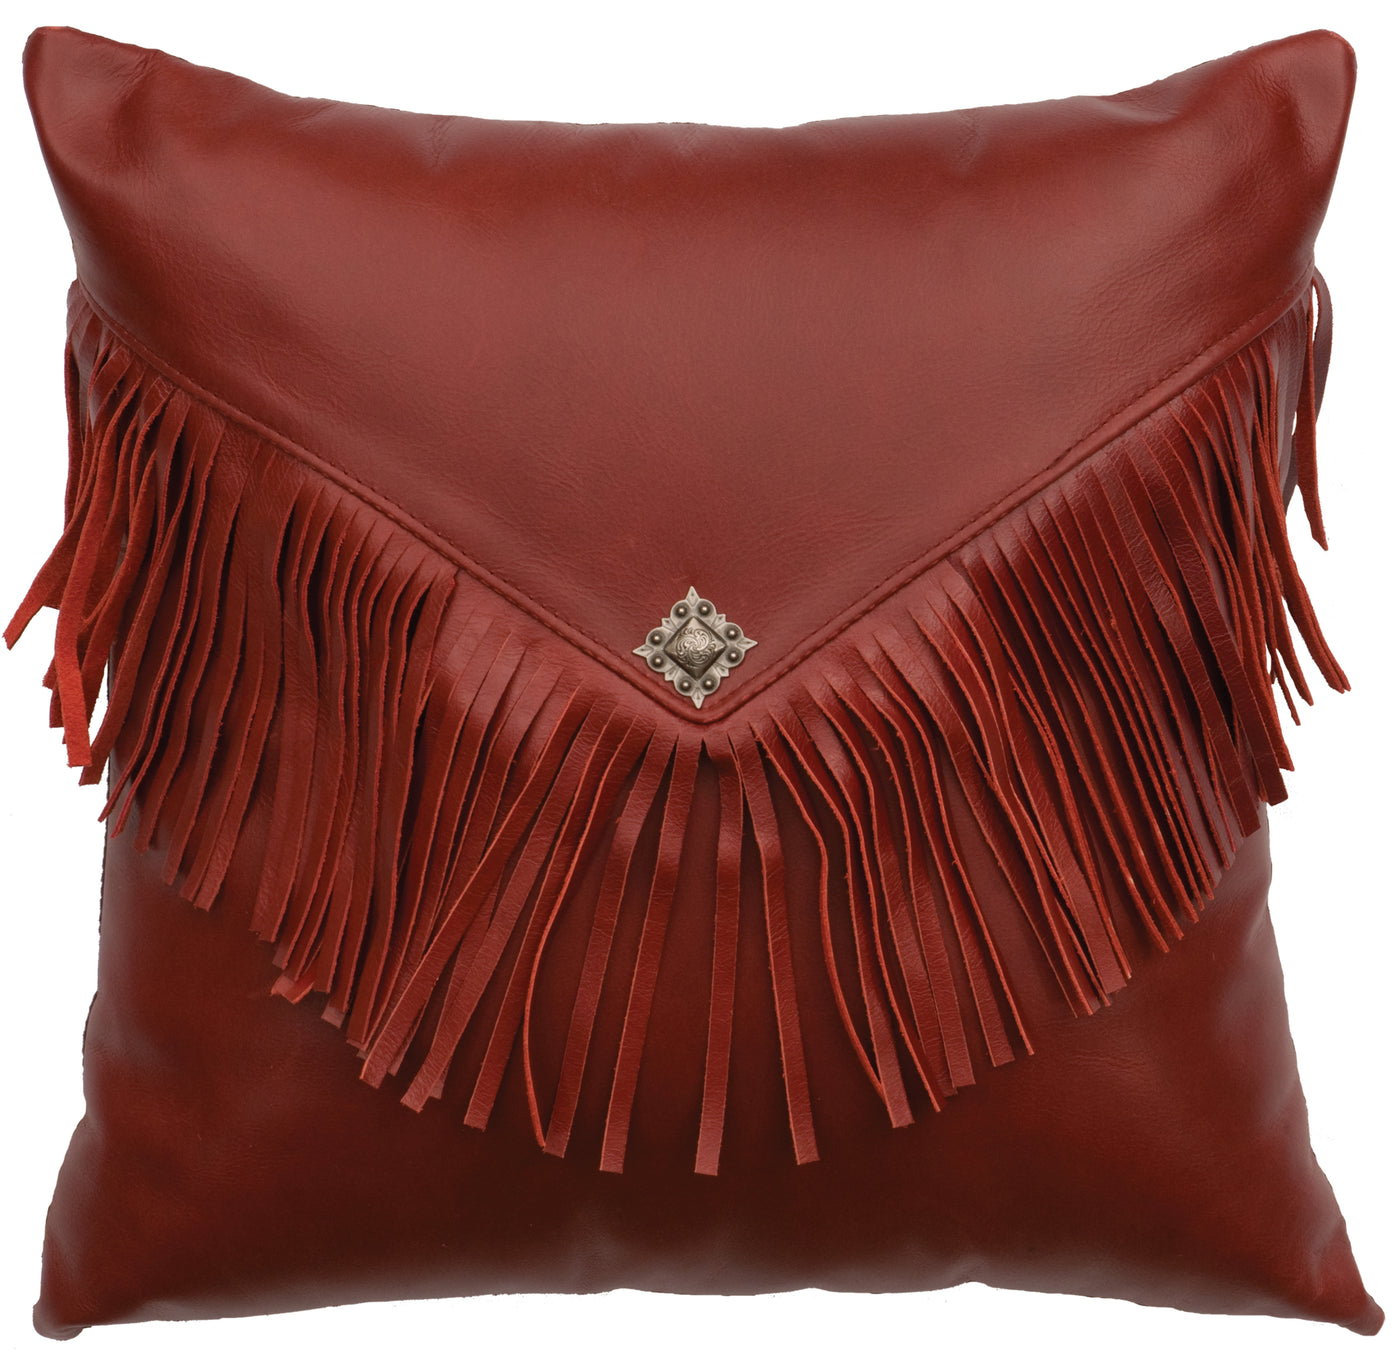 Canvello Dark Red Leather Pillow - Leather Back - 16" x 16"